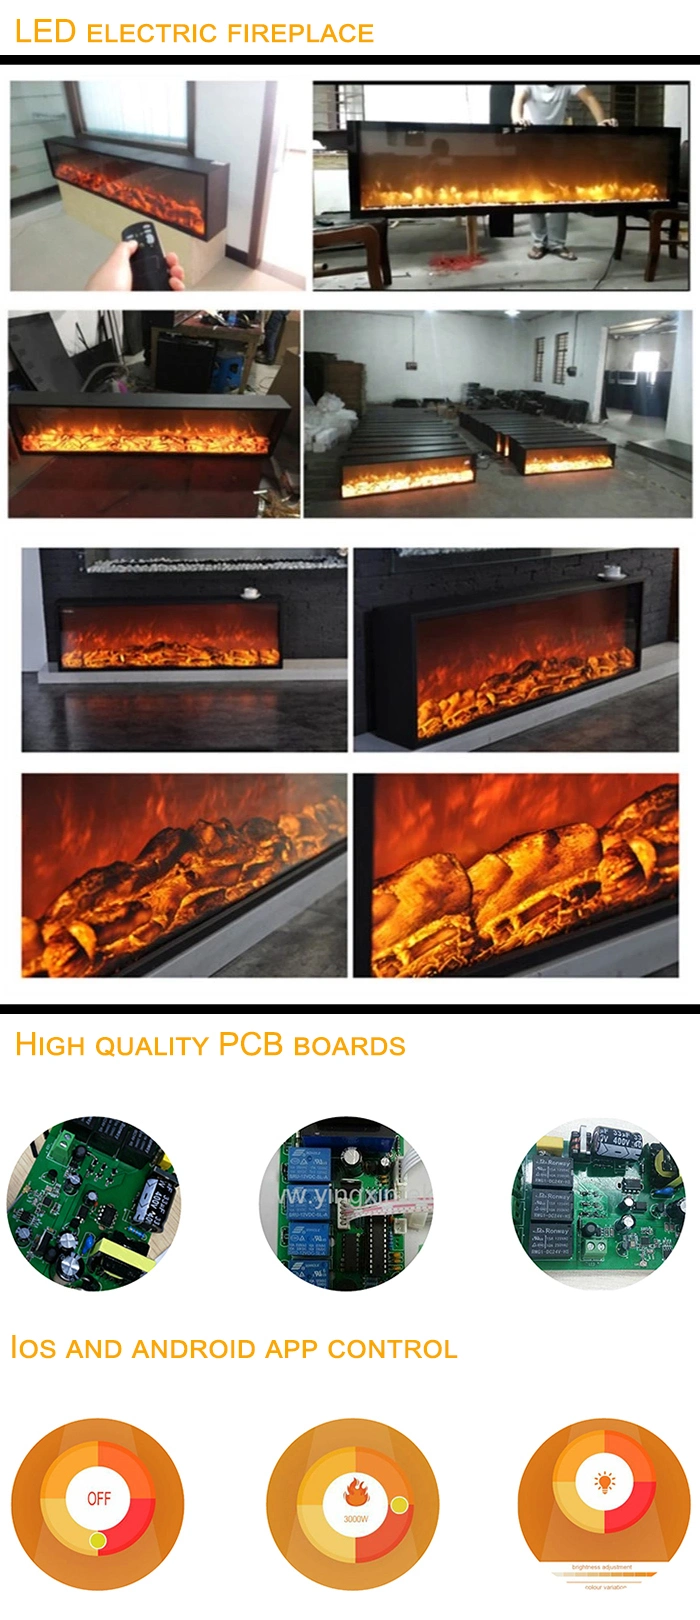 Wall Mounted Insert with Frames Fire Imitation Decorative Electric Fireplace Without Heat